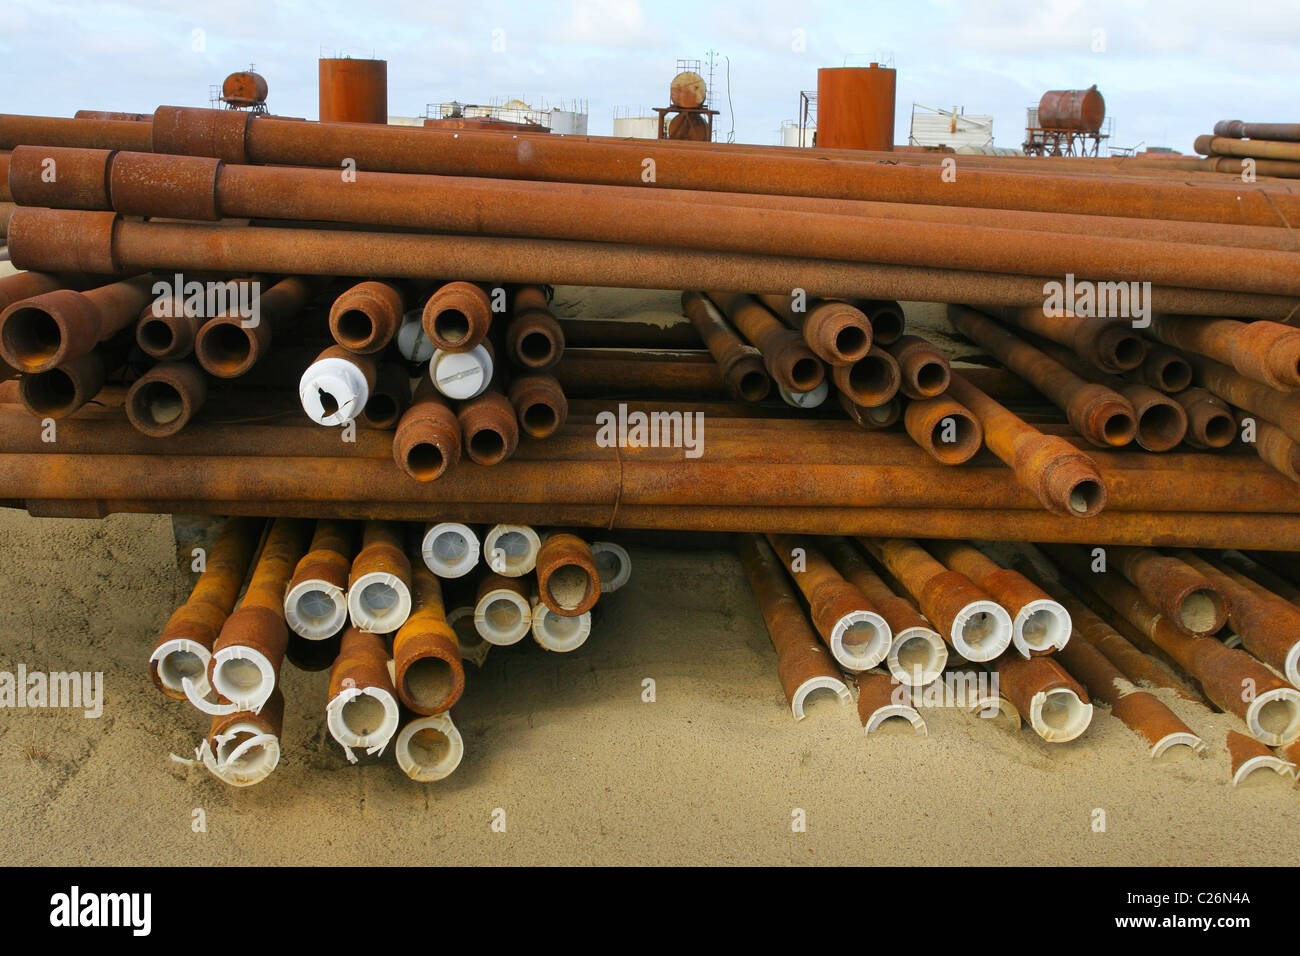 Warehouse of drill pipes with plastic lids on the end of some of them. Yamal peninsula, RUSSIA Stock Photo